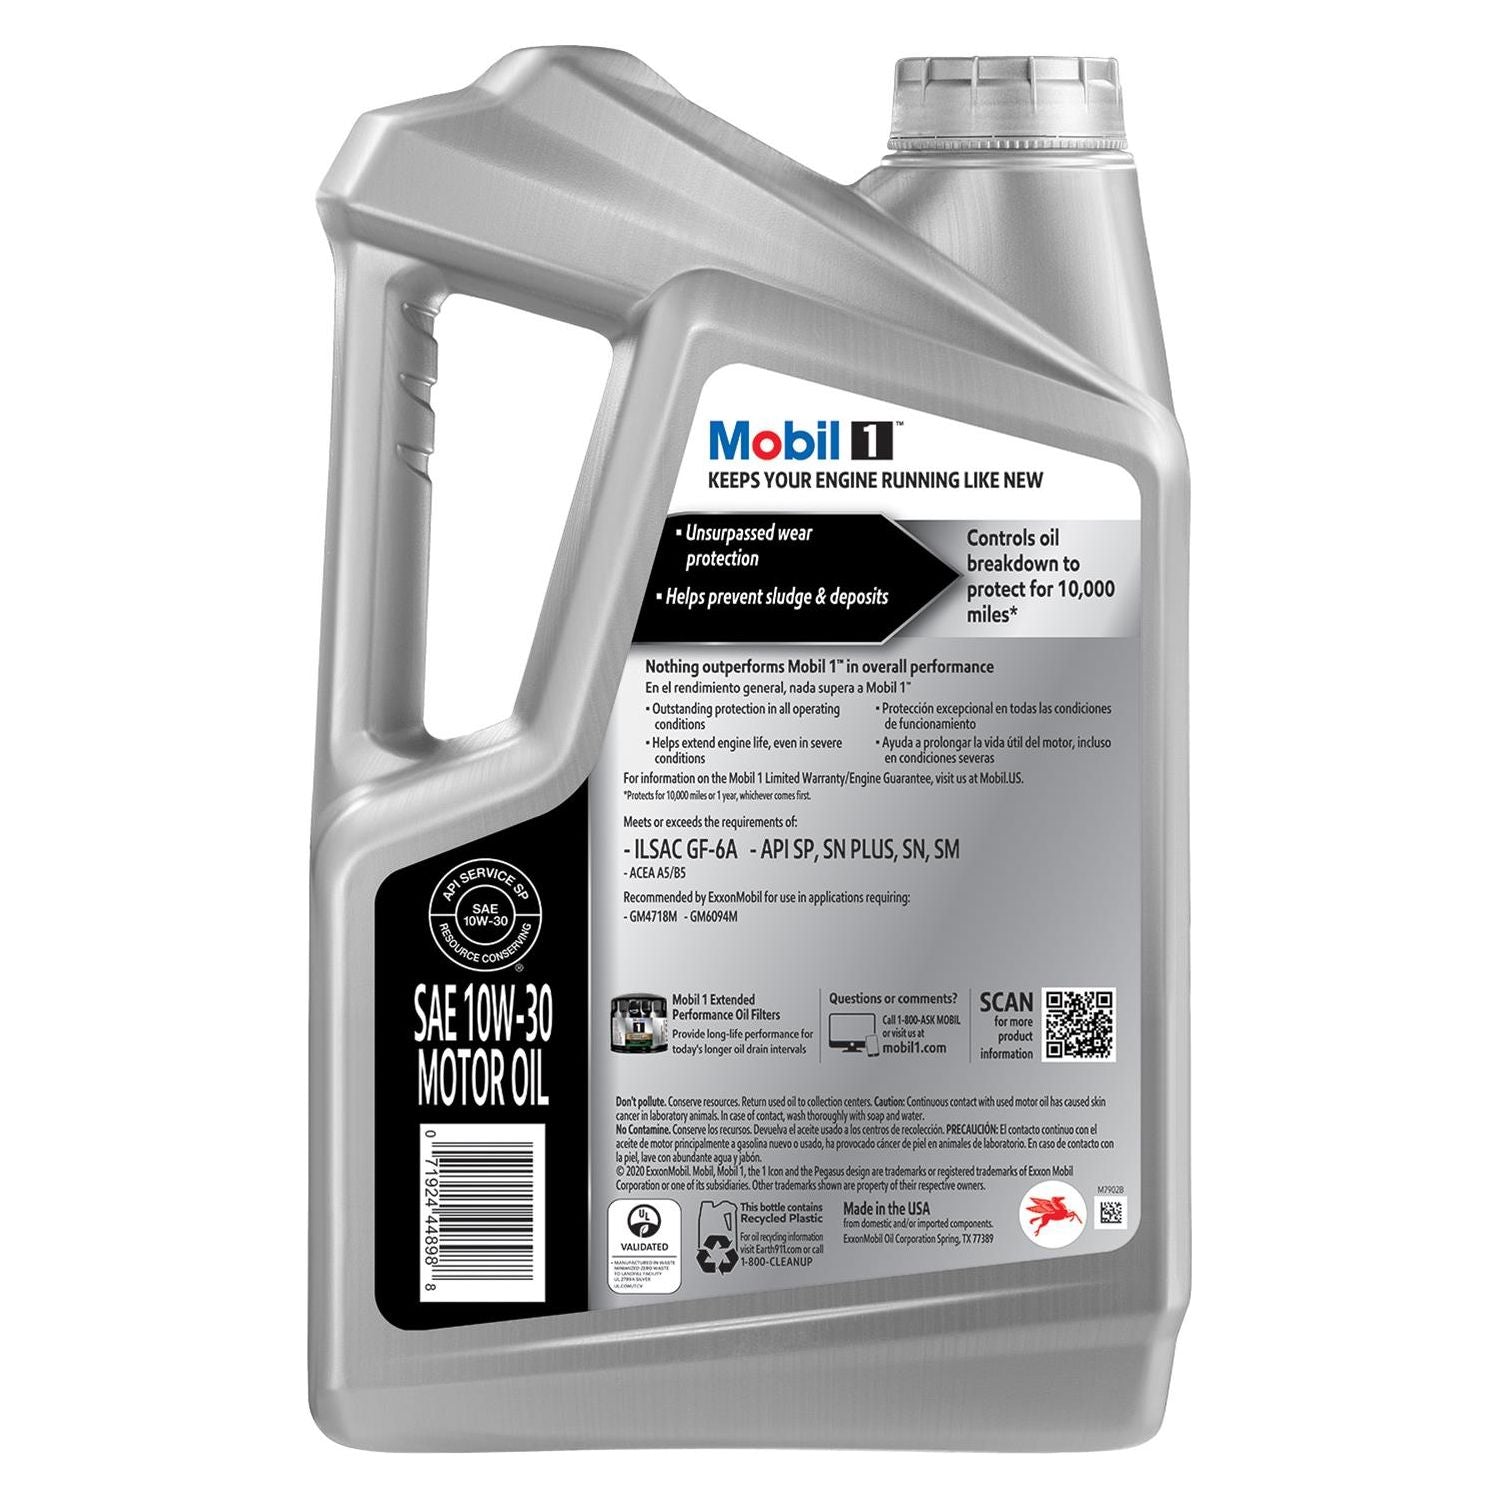 Mobil 1 Synthetic Motor Oil 122326